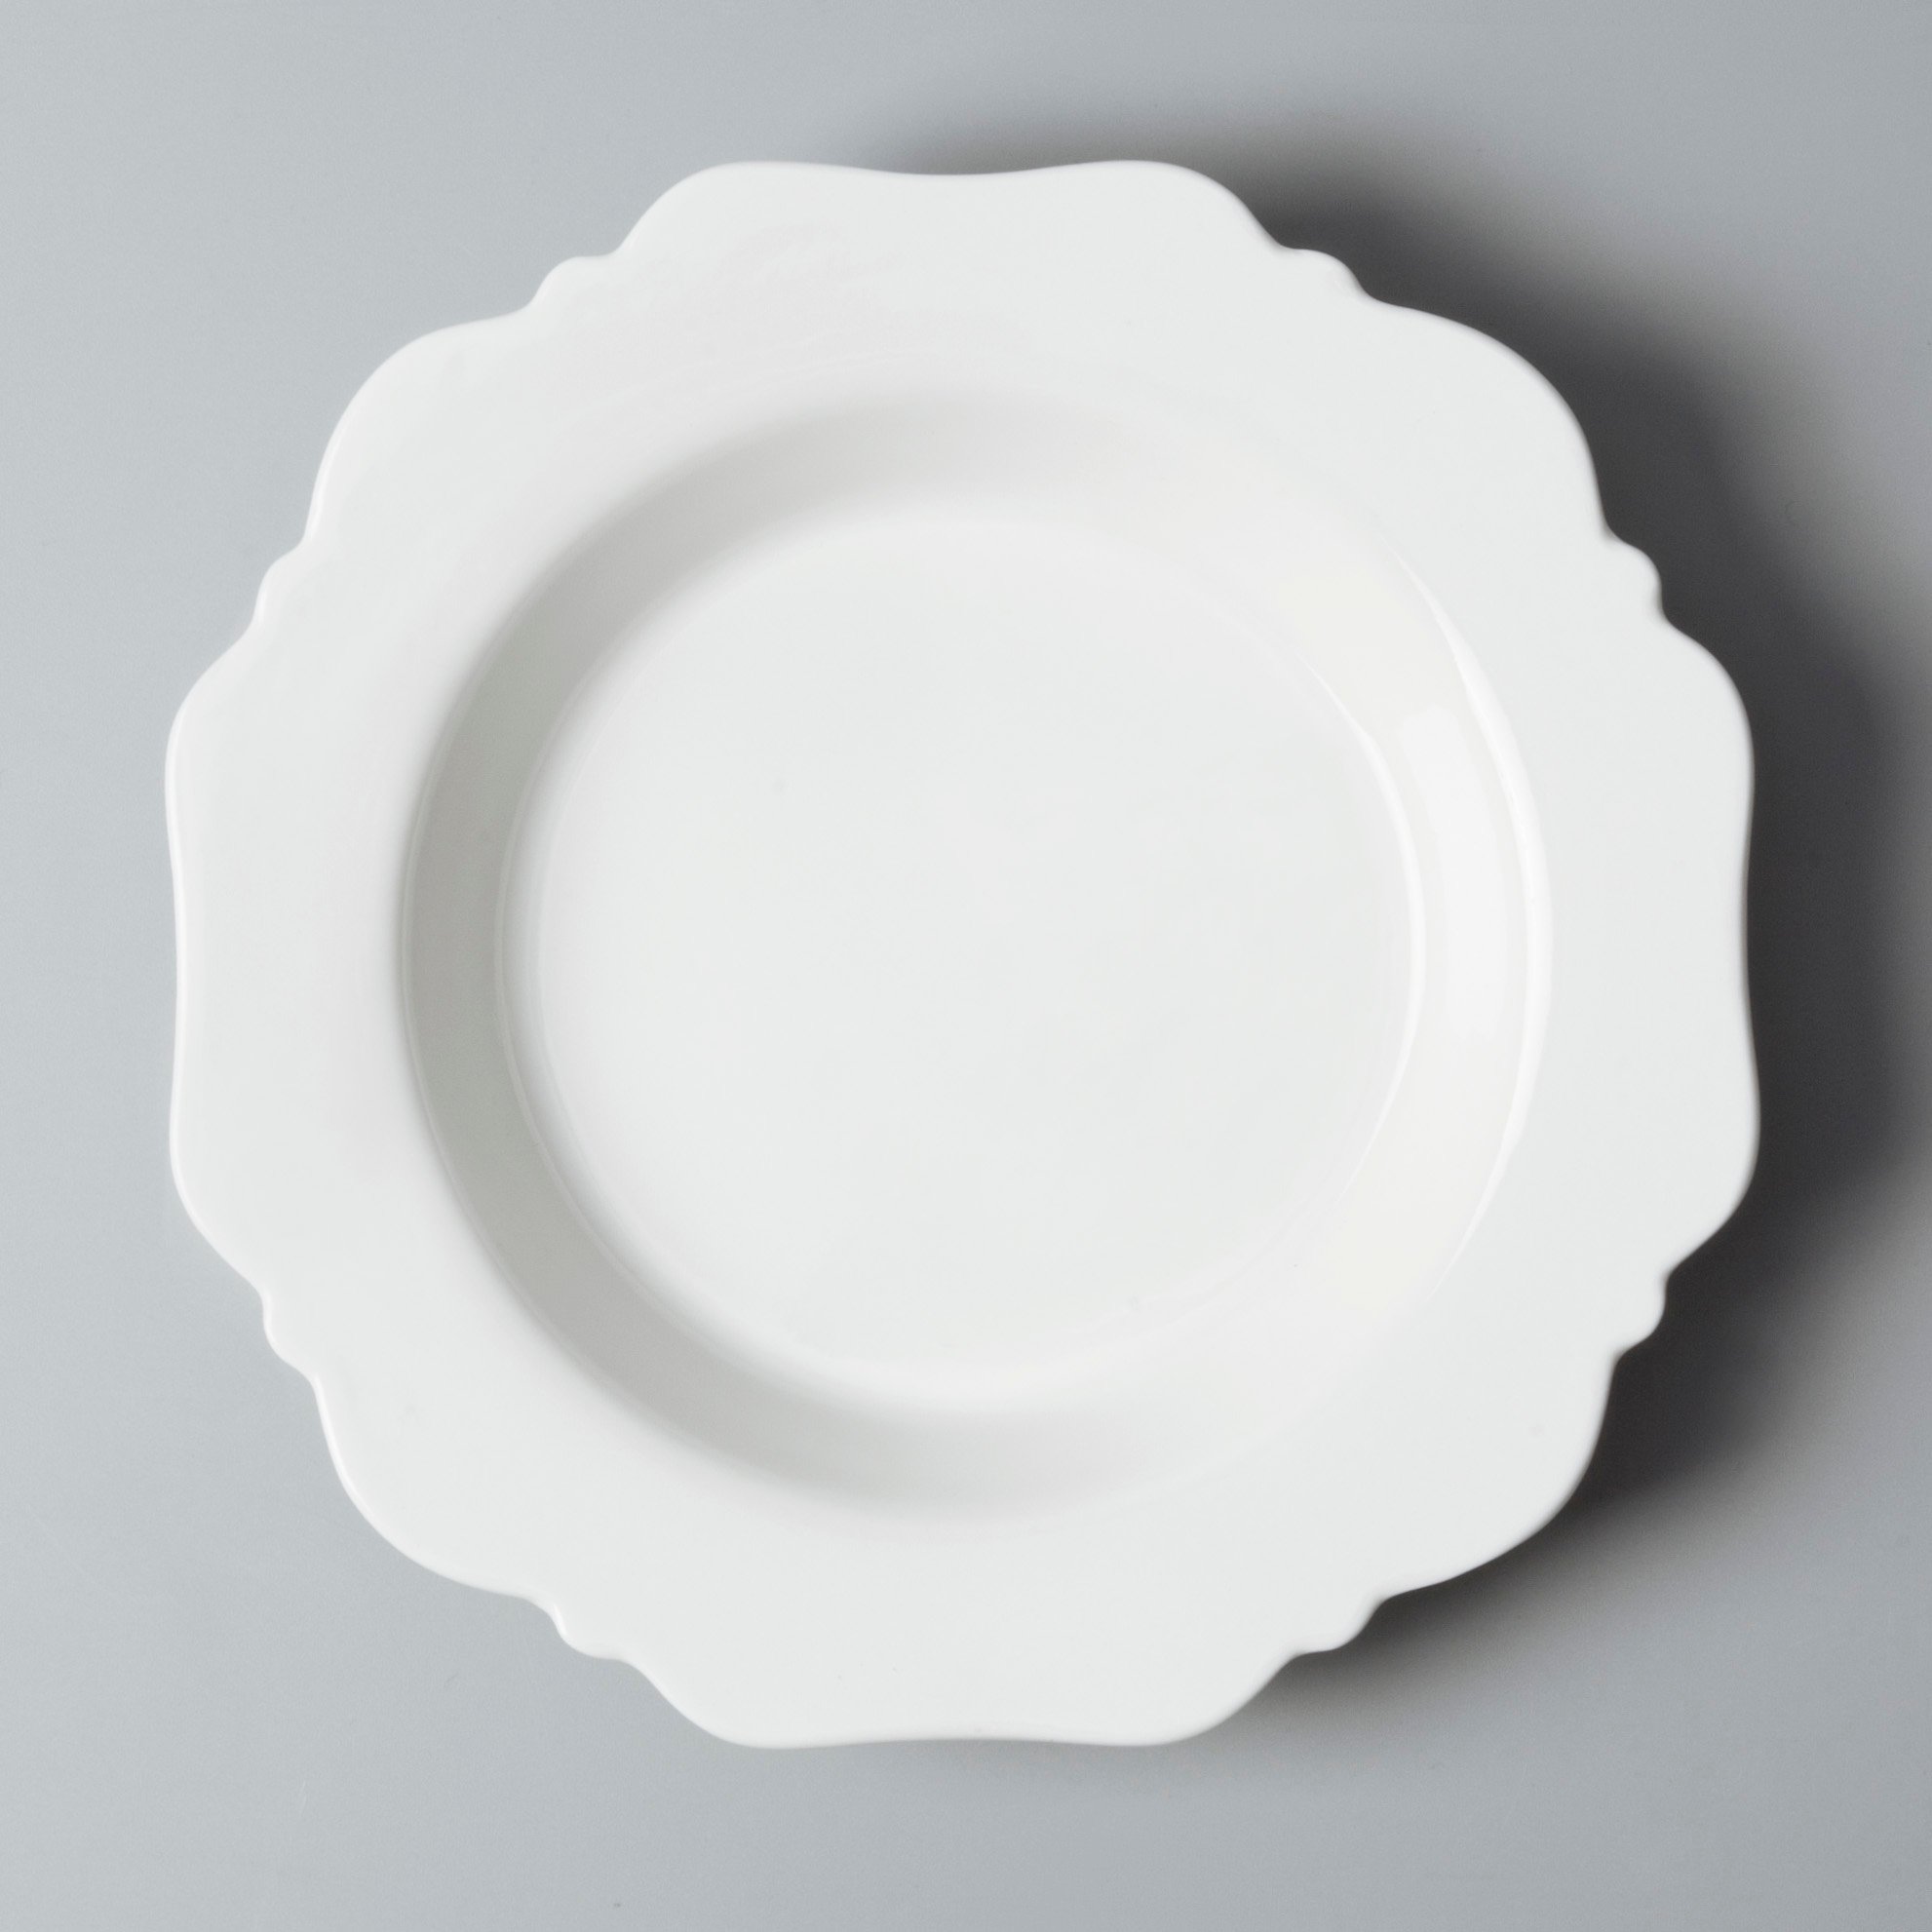 smooth best porcelain dinnerware in the world french style series for dinner-4